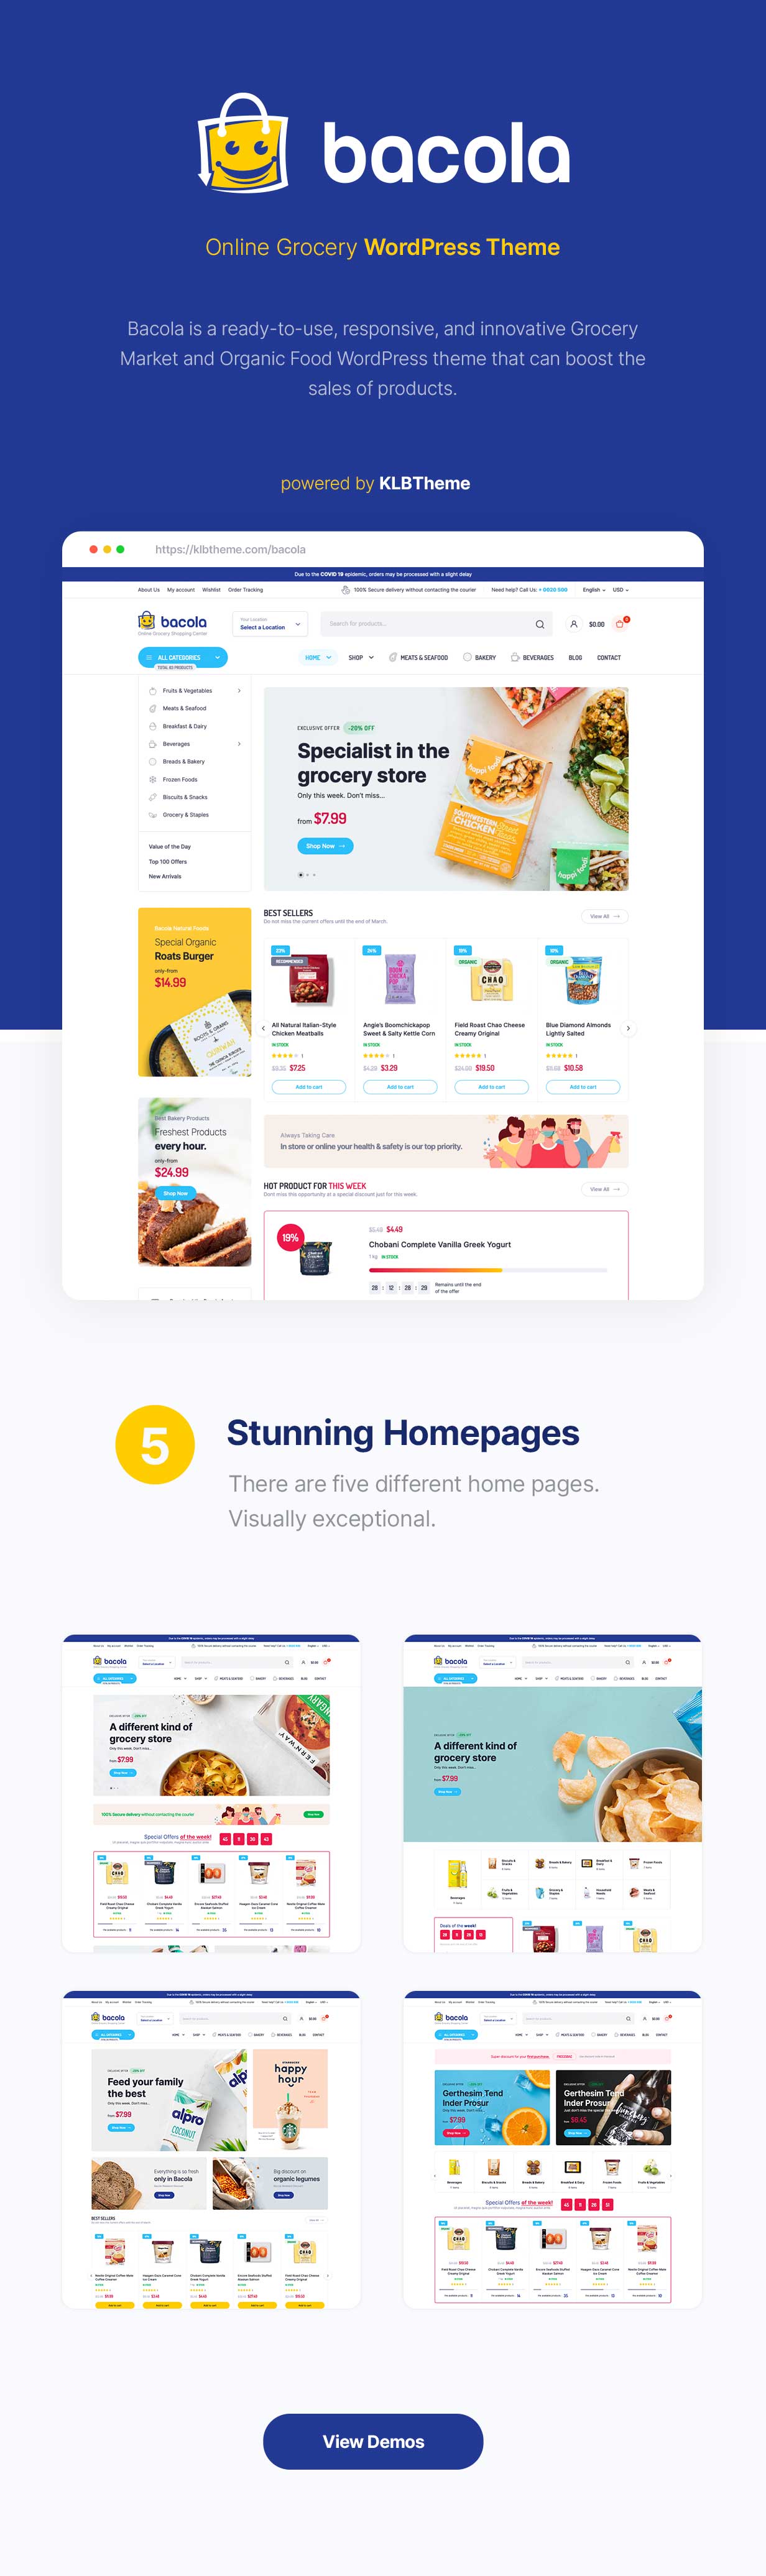 bacola1 - Bacola - Grocery Store and Food eCommerce Theme